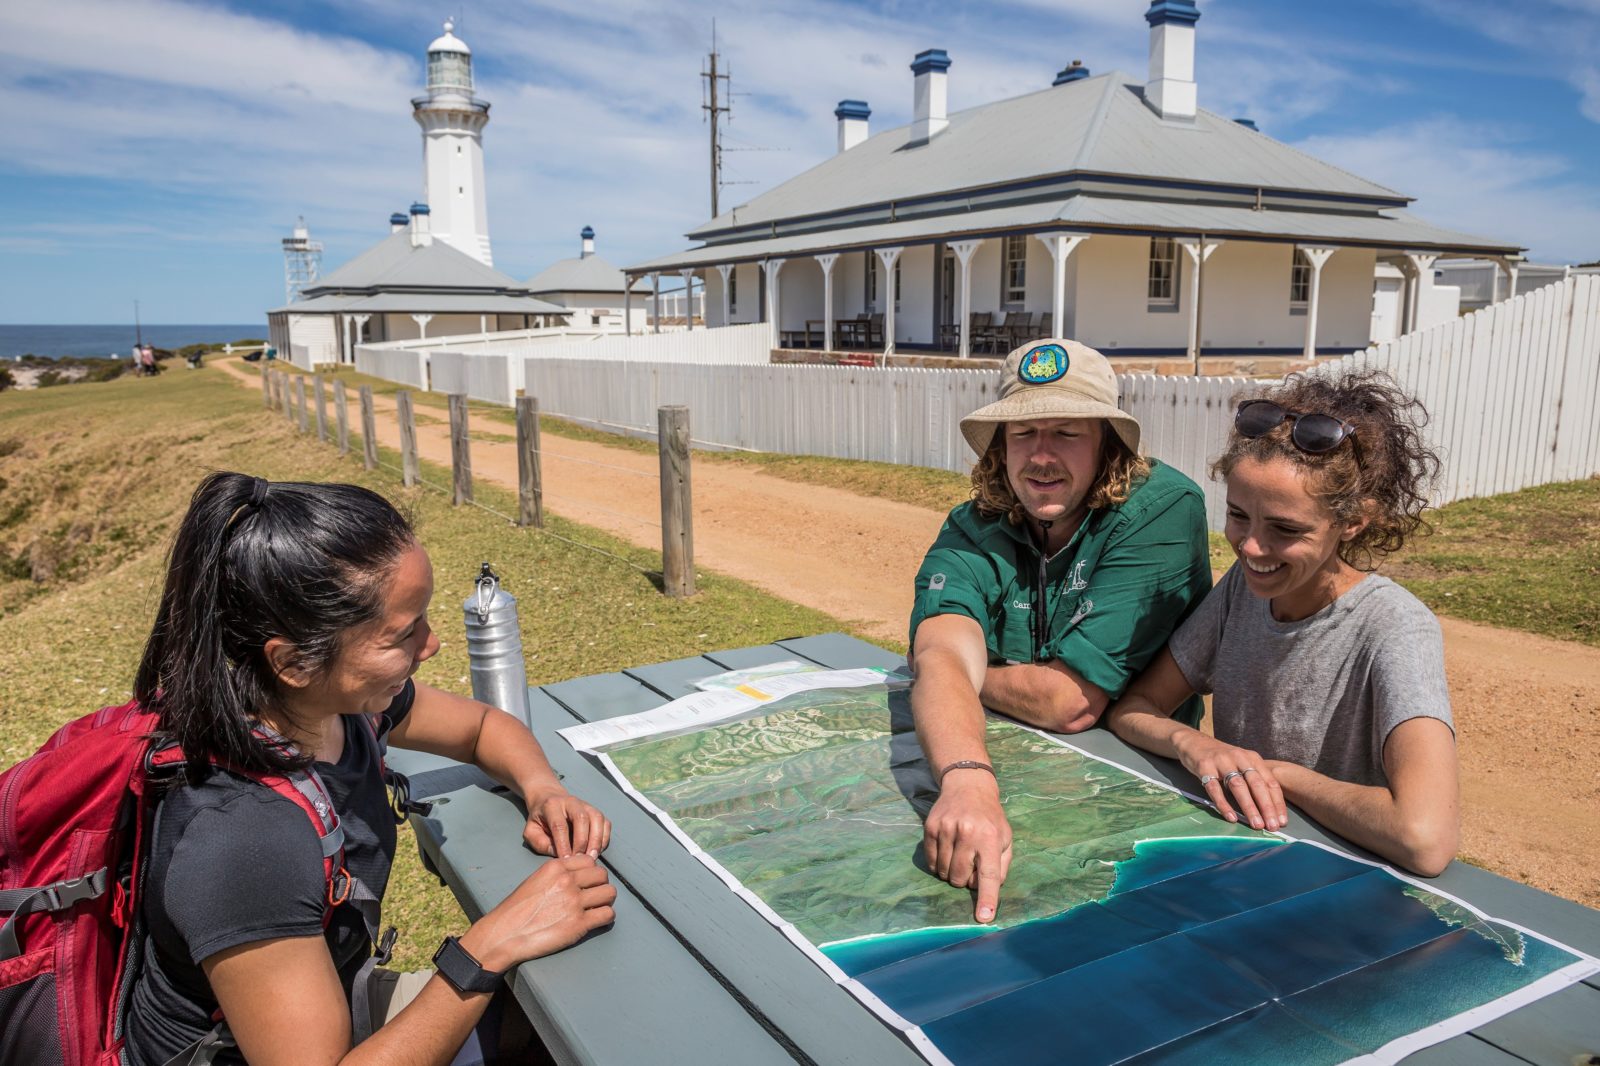 Guide showing guests places on a map while seated in the sun outside the heritage listed lighthouse